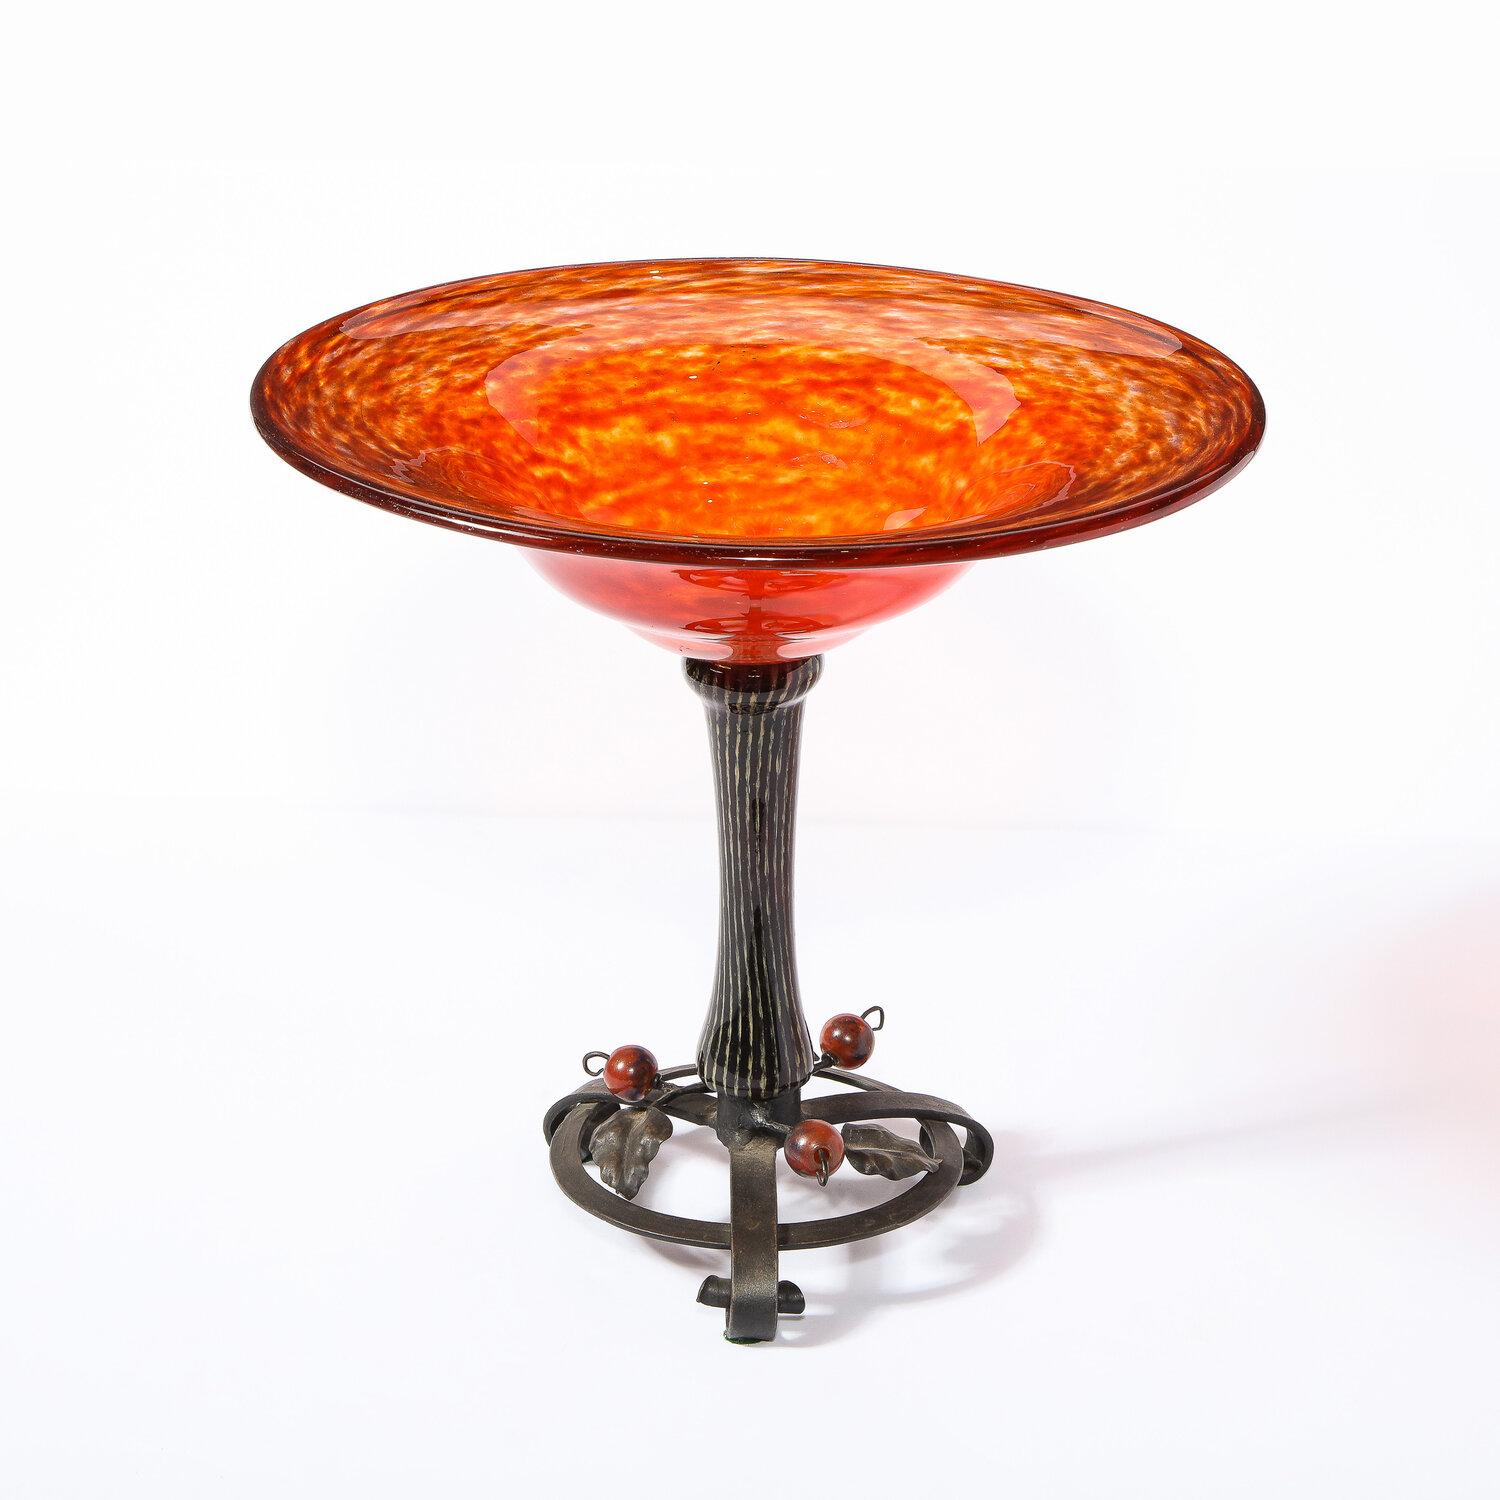 Early 20th Century Art Deco Mottled Carnelian Glass Bowl w/ Wrought Iron Base Signed by Schneider For Sale